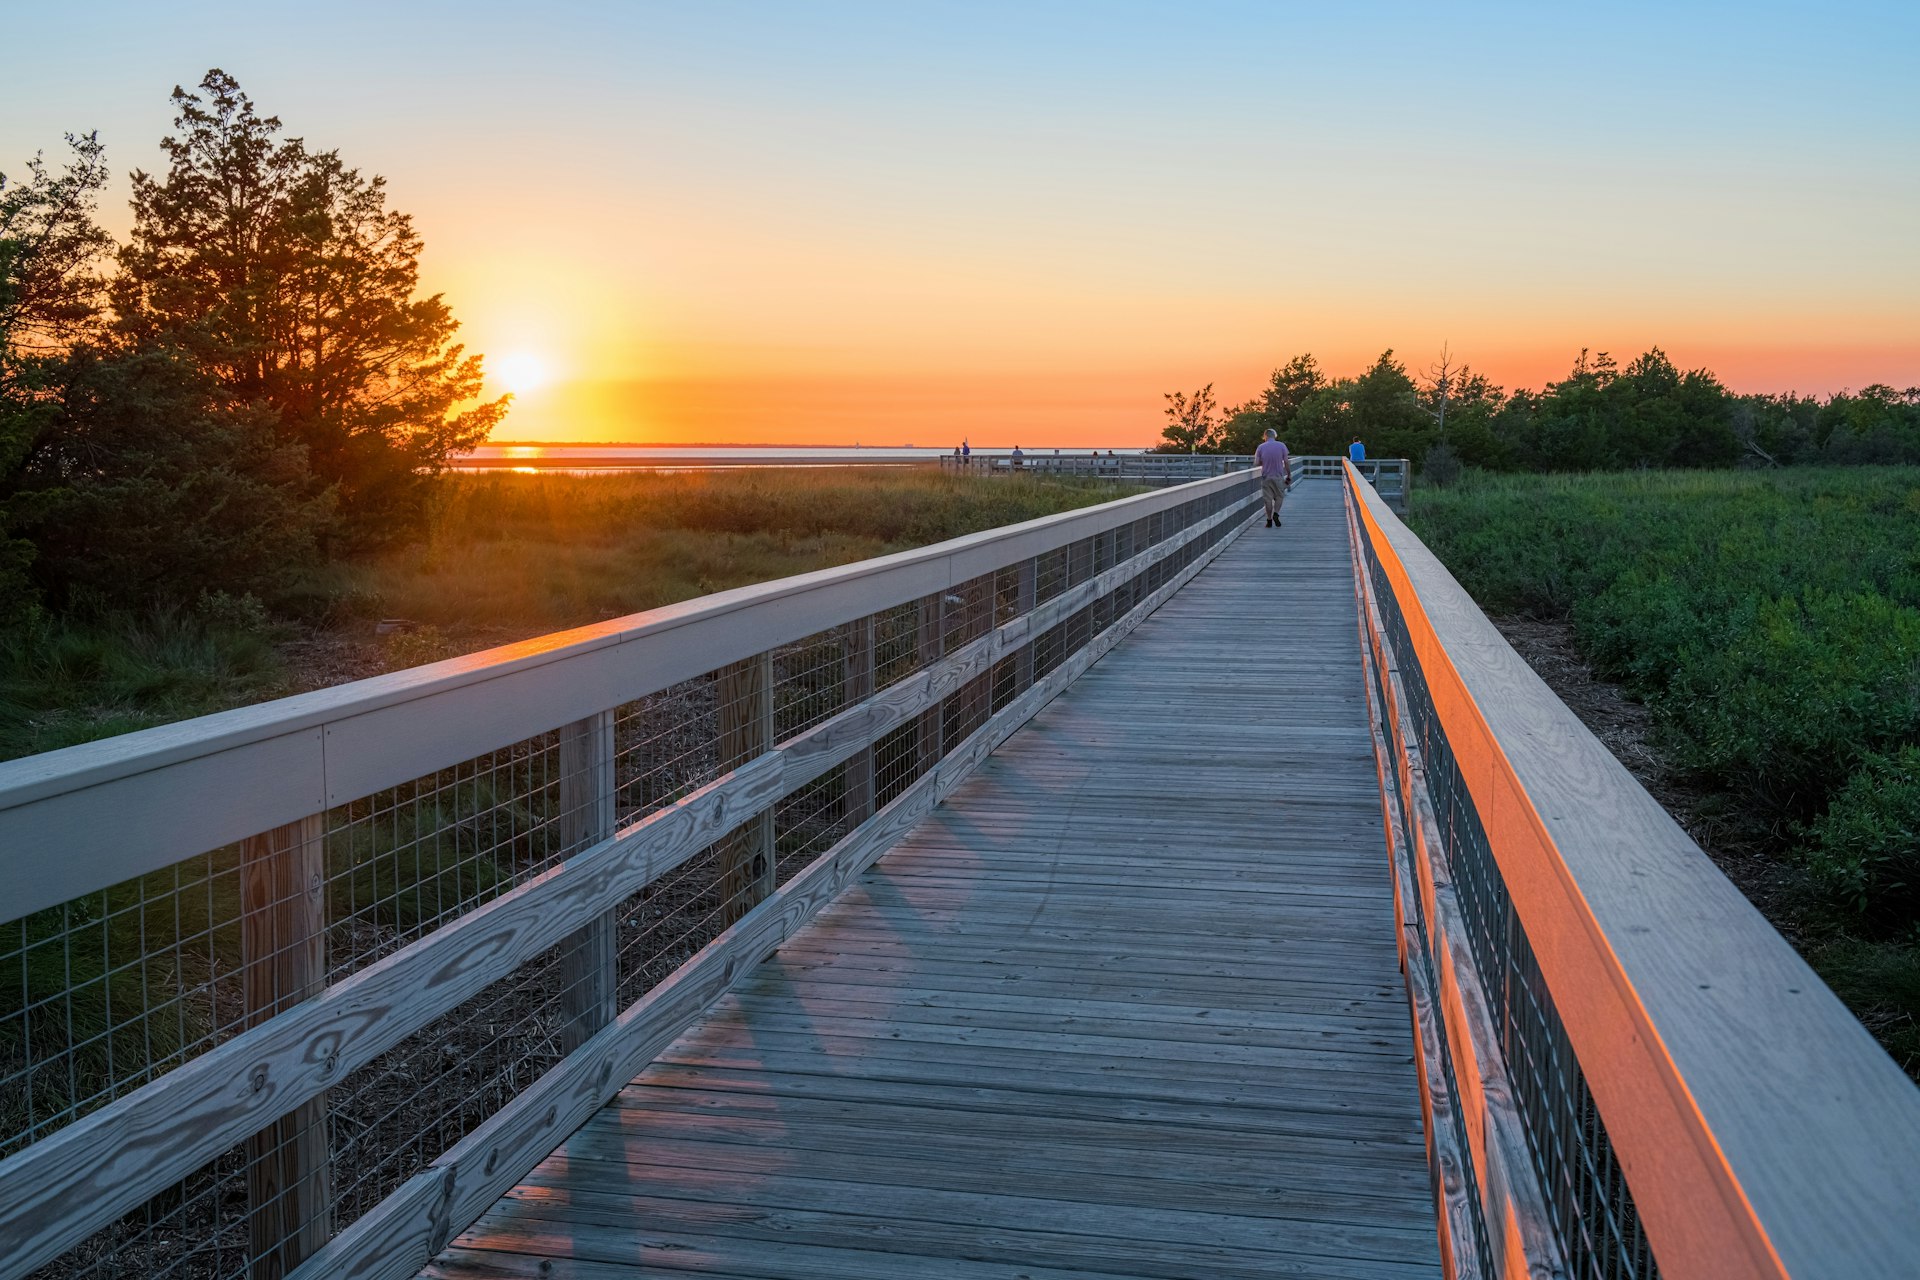 A wooden footbrdge at dusk in the Sandy Hook National Recreation Area along the Jersey shore